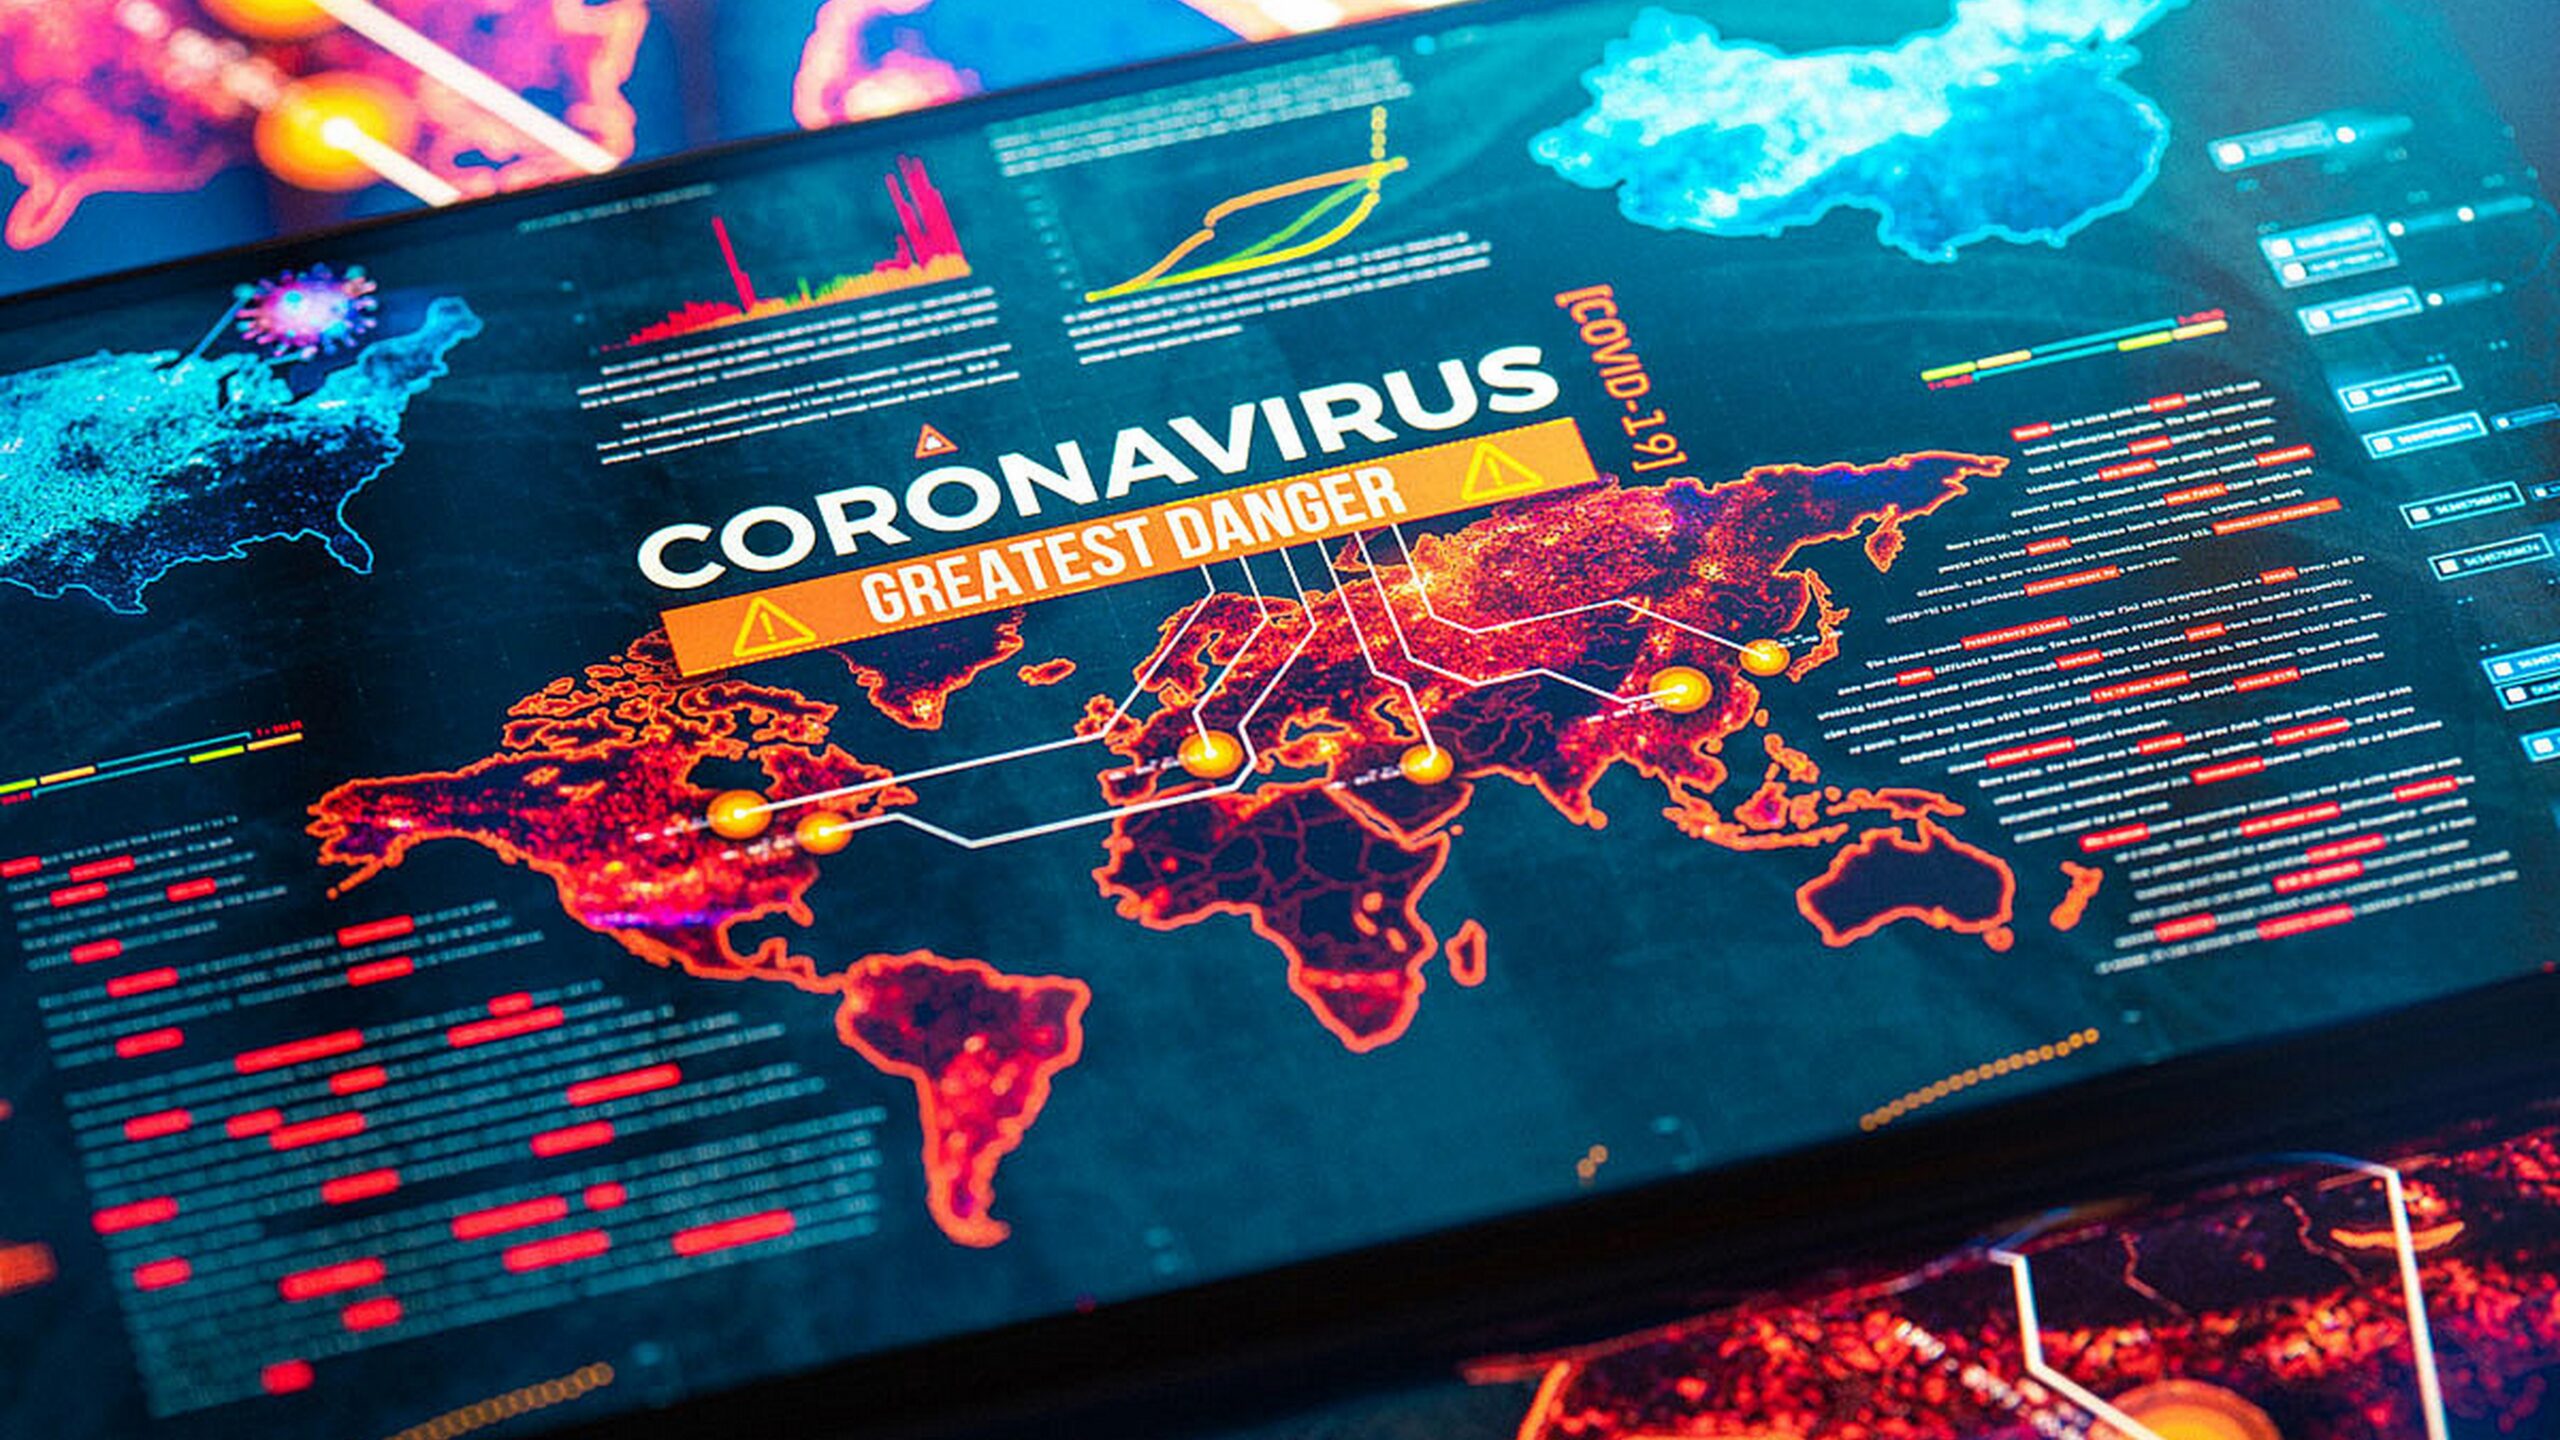 A picture of the coronavirus greatest danger information on the screen